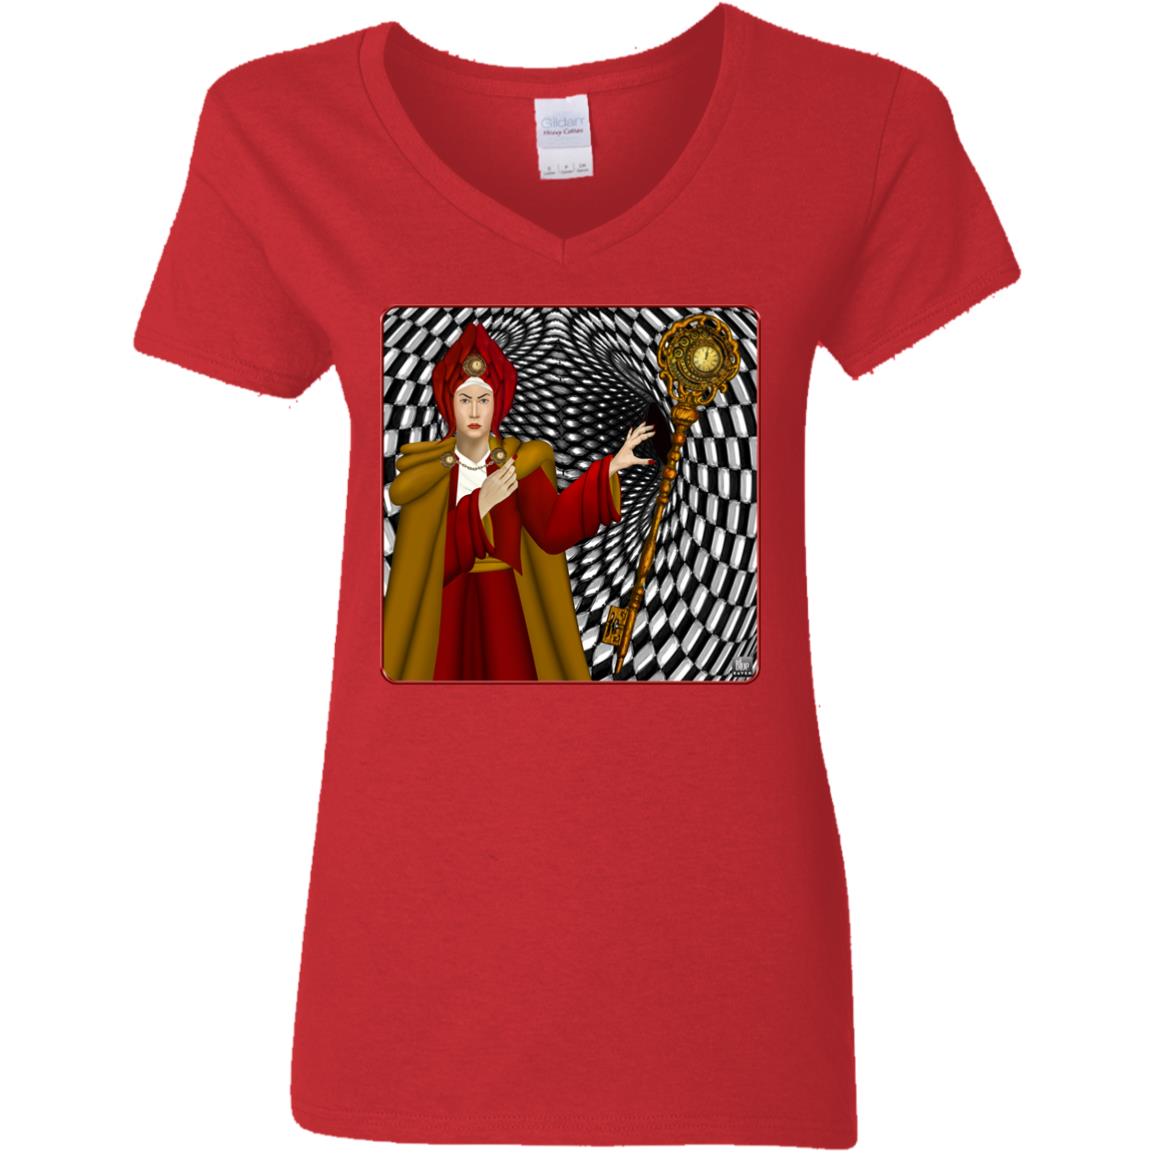 Portrait Of The Red Queen - Women's V-Neck T Shirt